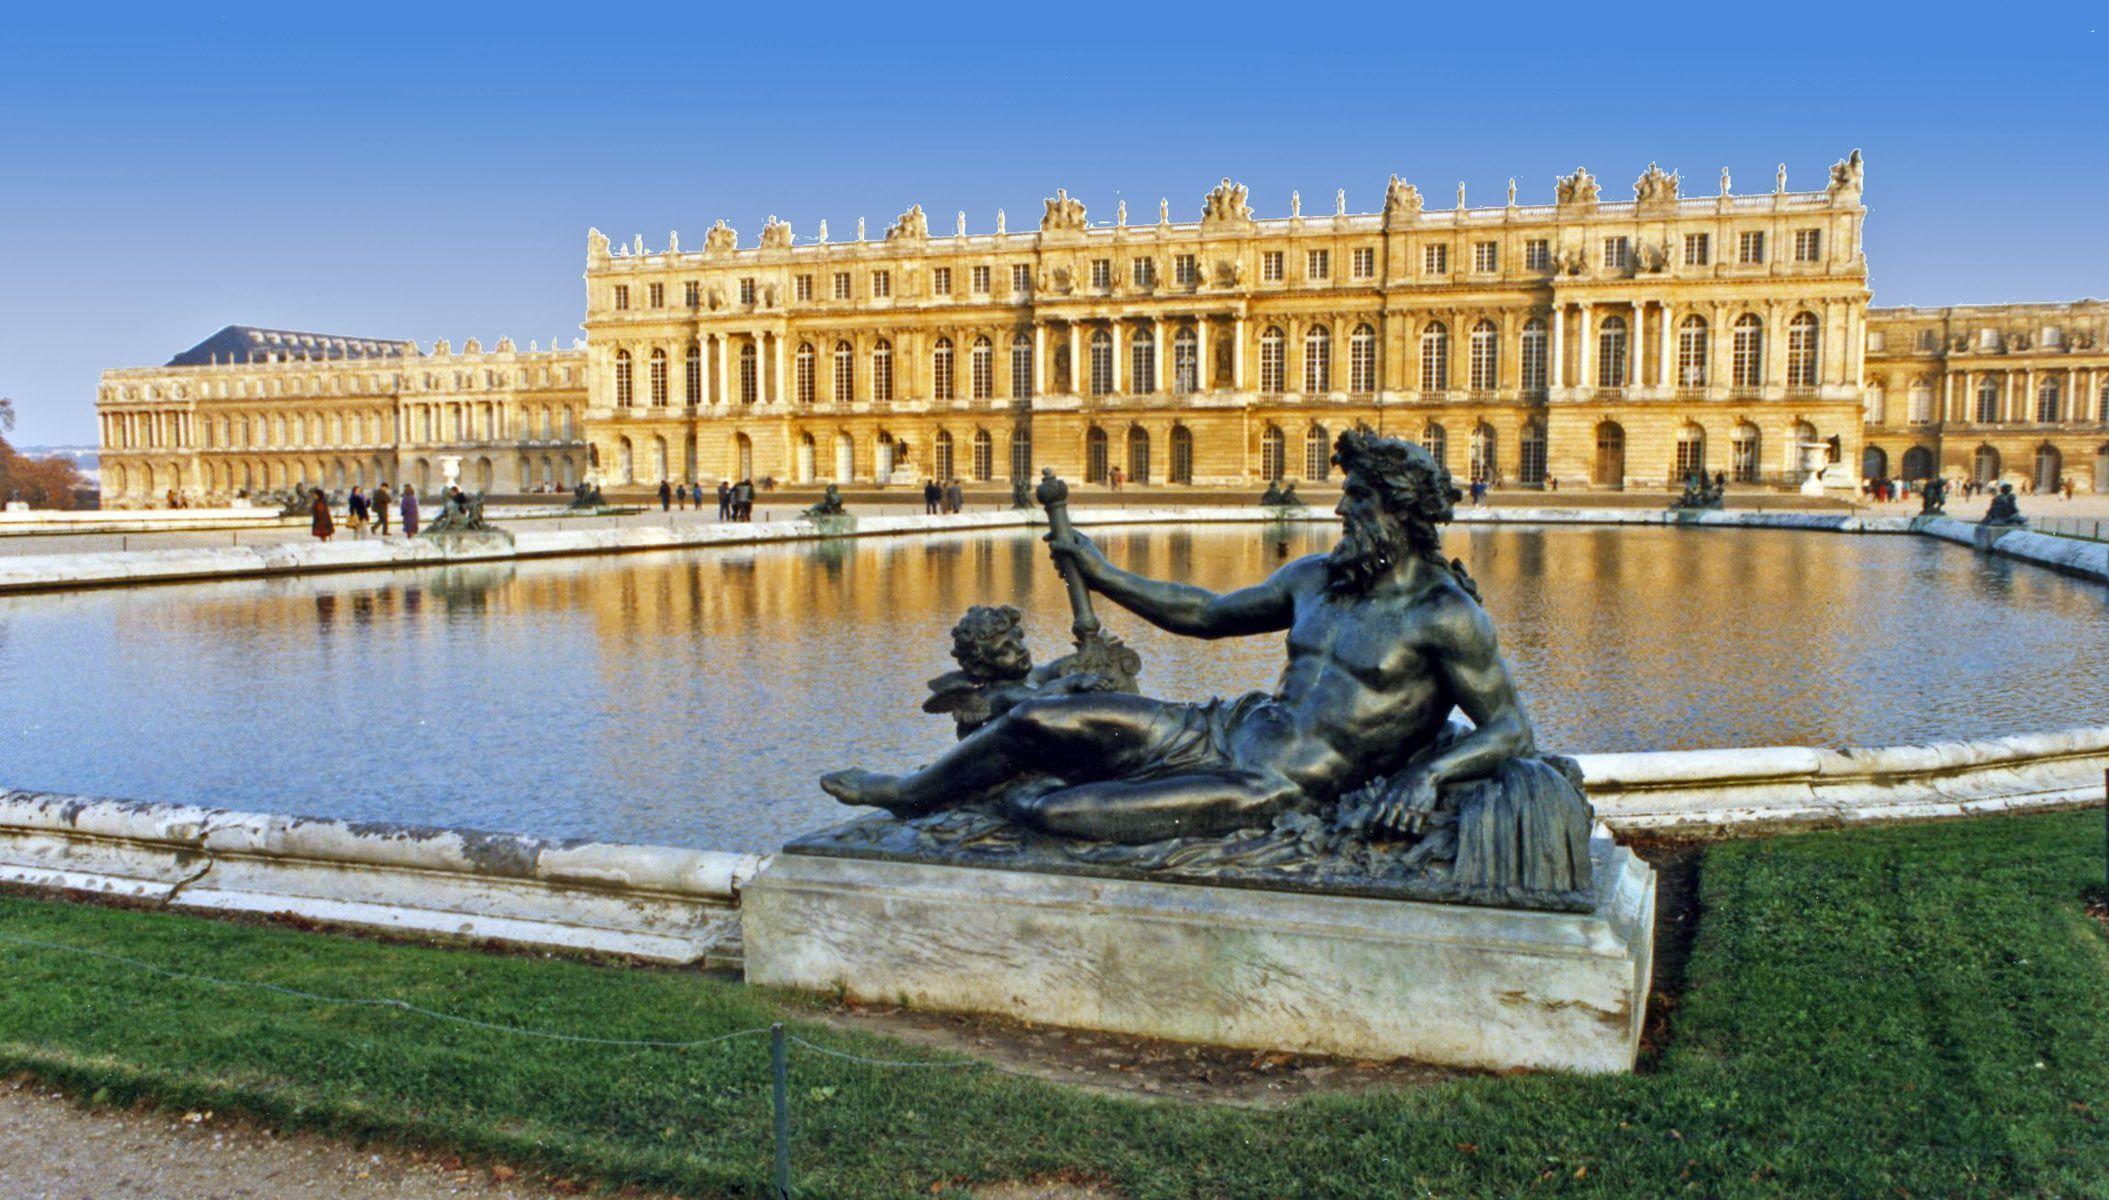 Neptune and the palace of versailles in france HD wallpaper Stock